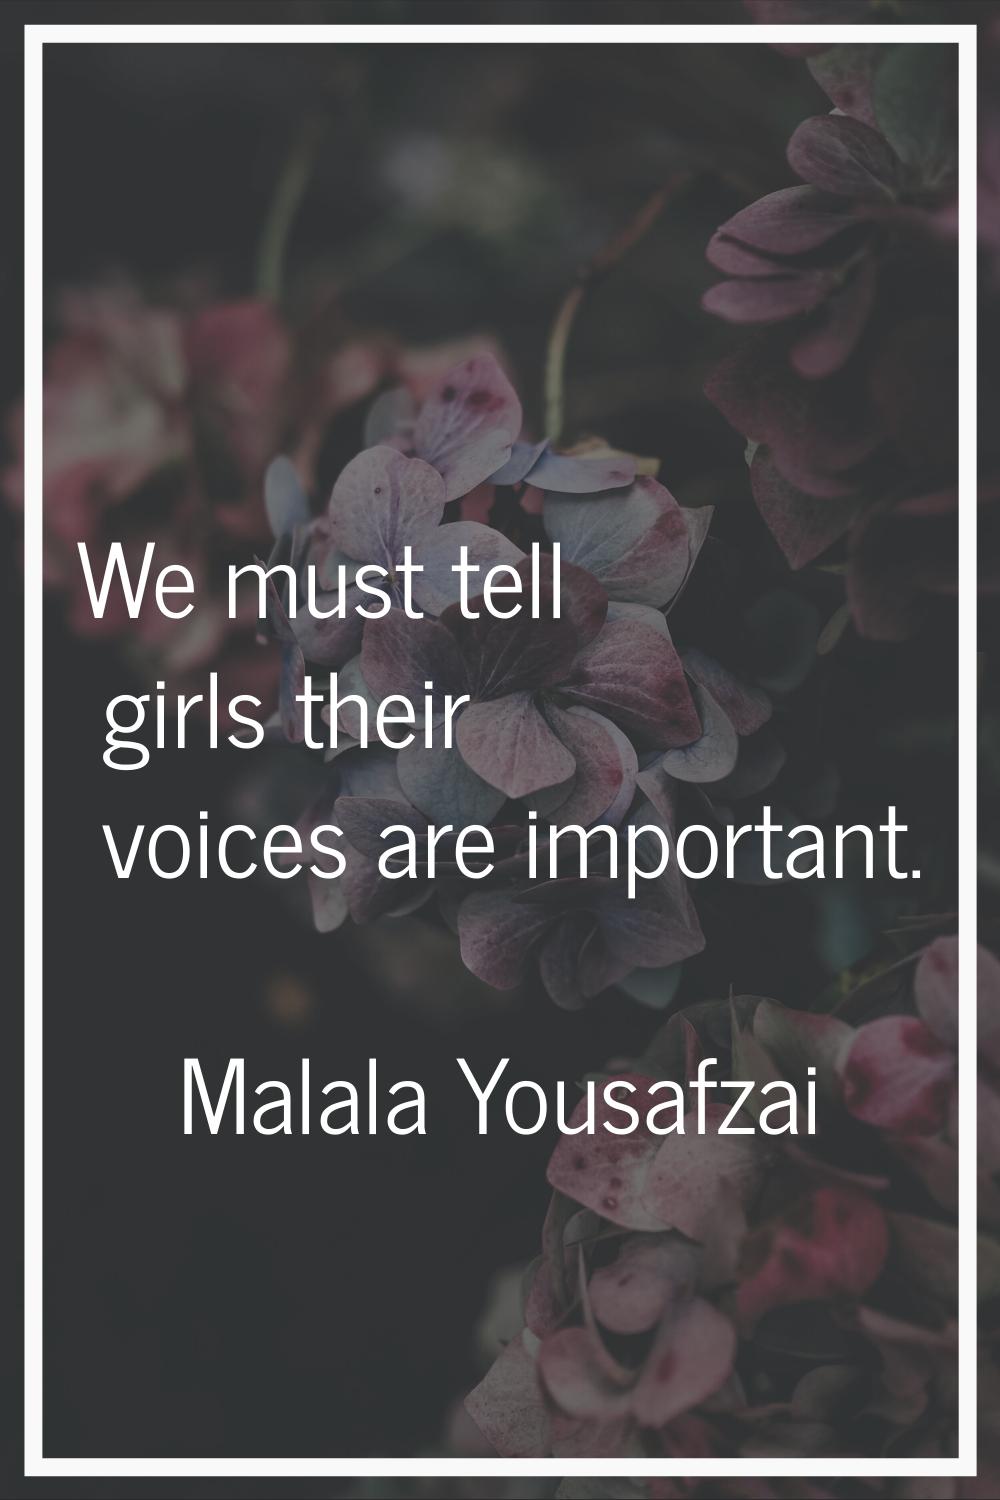 We must tell girls their voices are important.